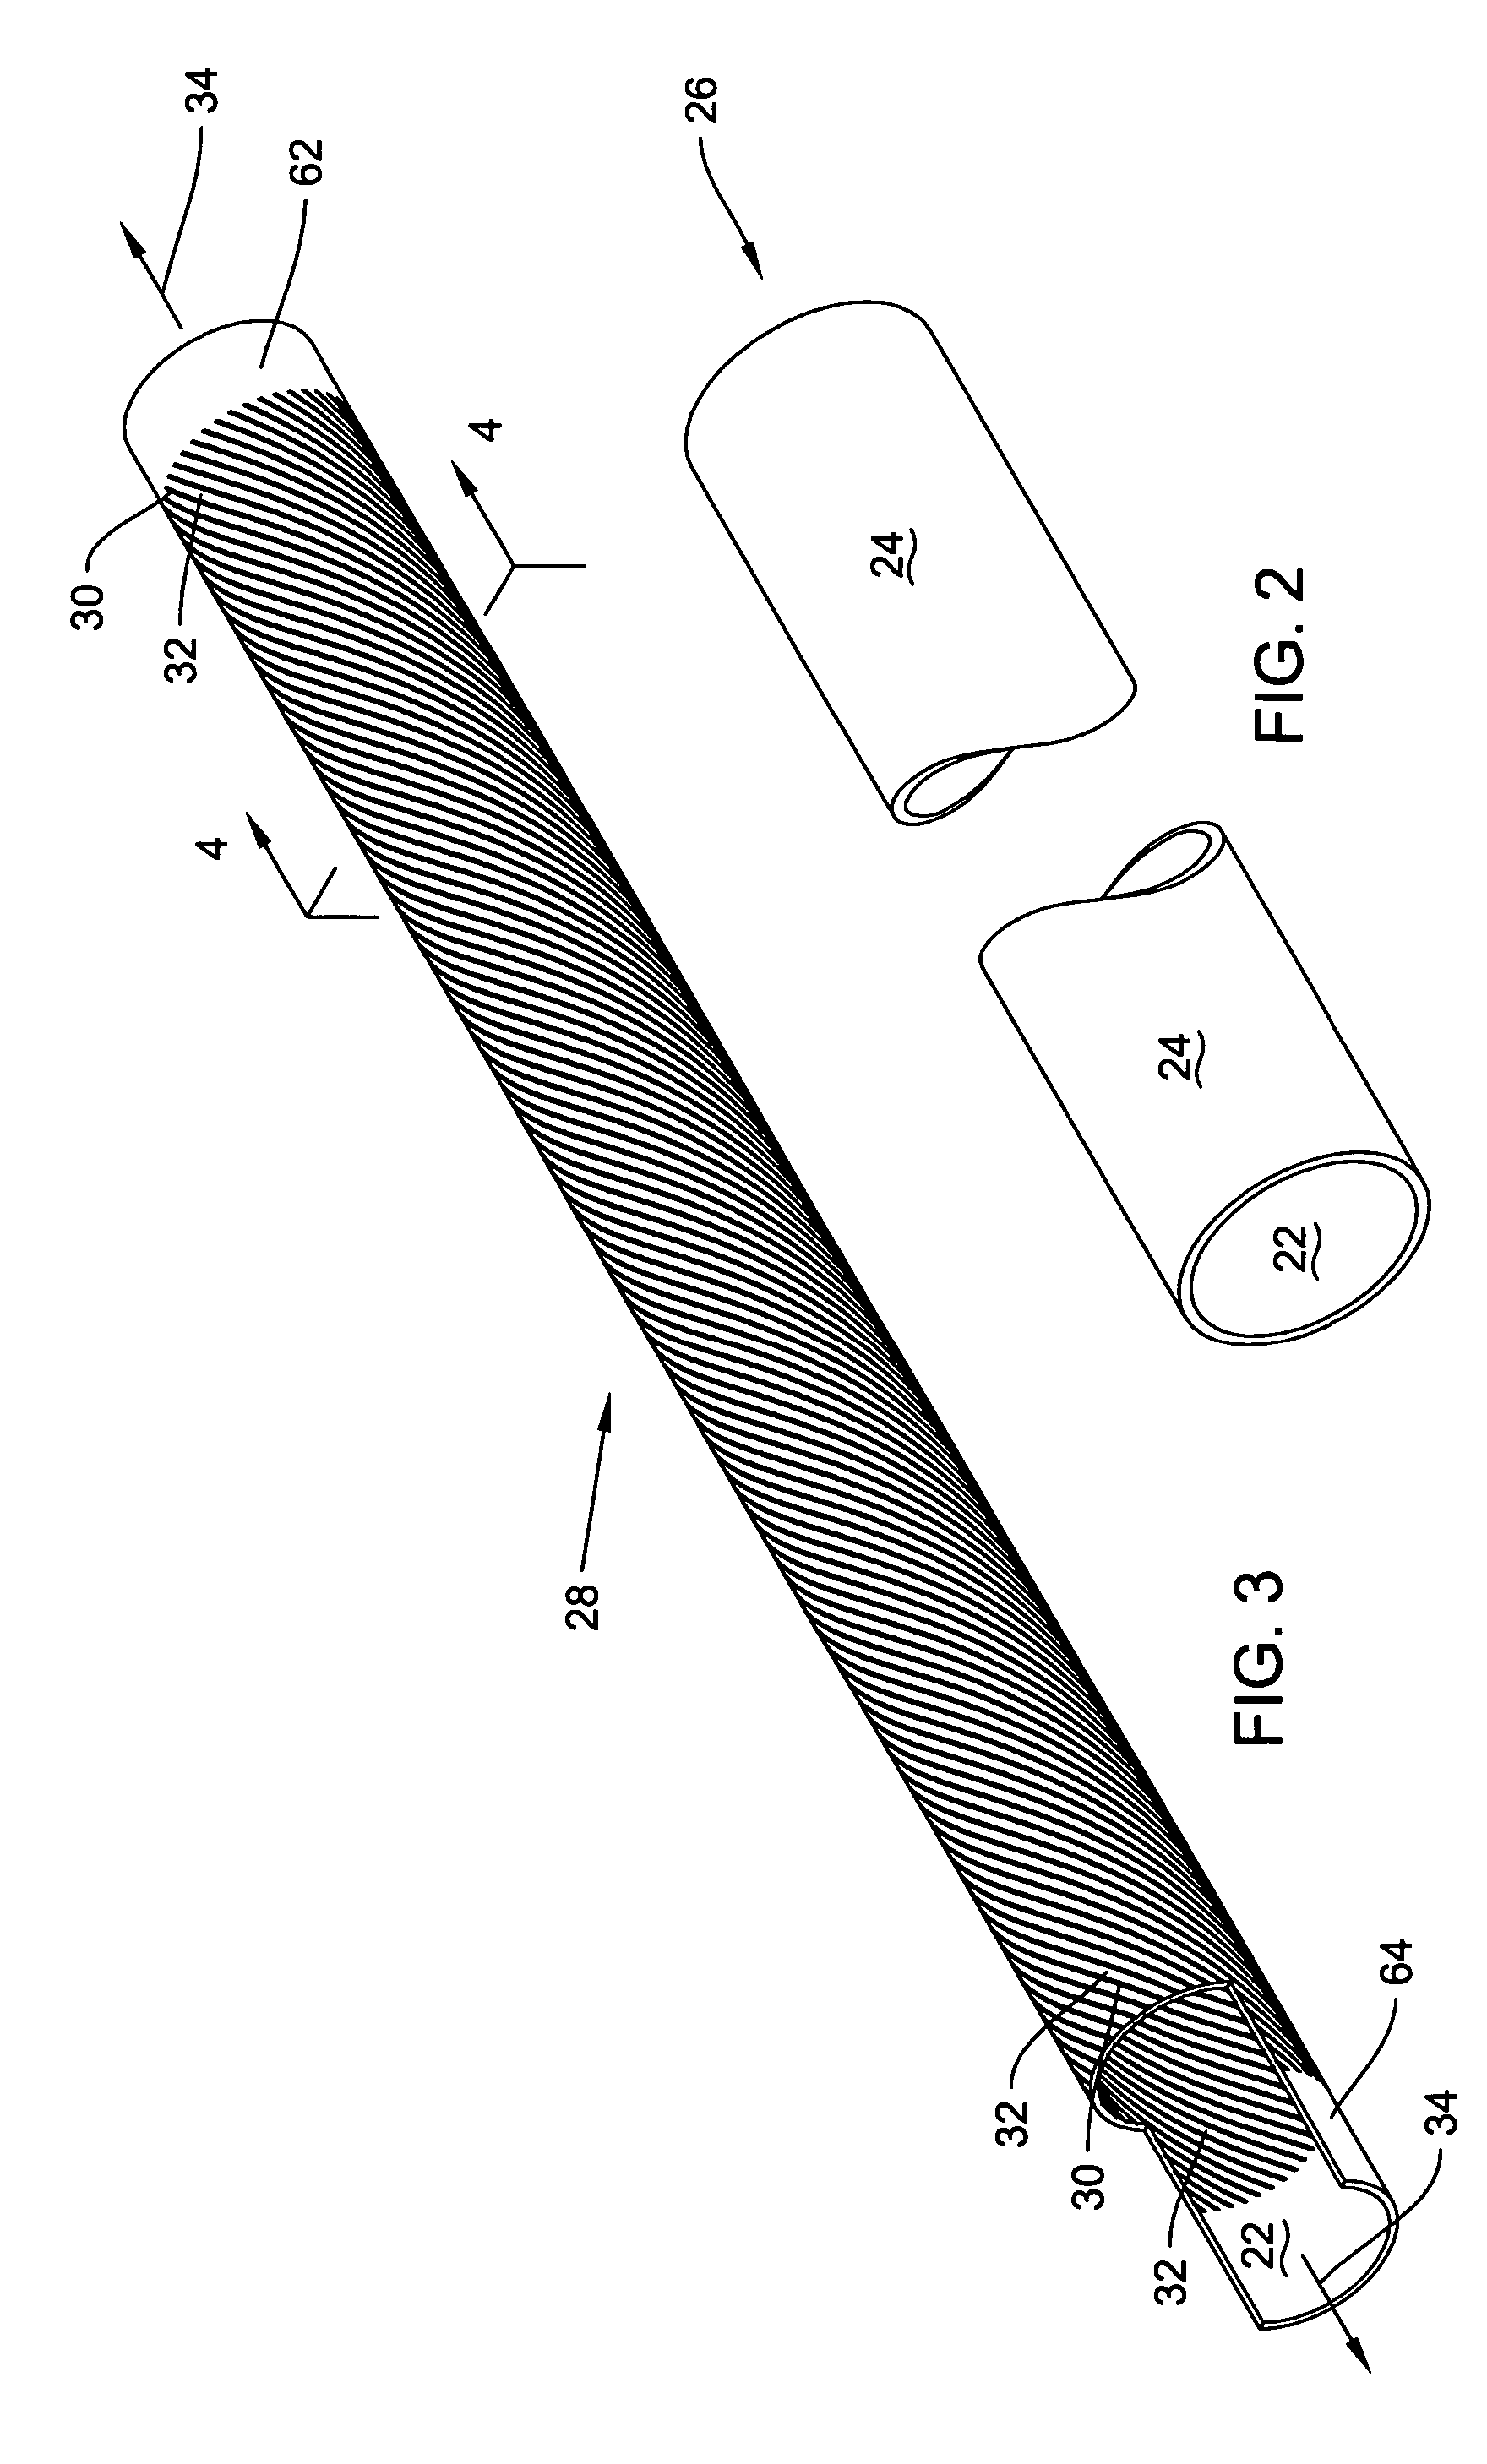 Apparatus and methods for forming internally and externally textured tubing